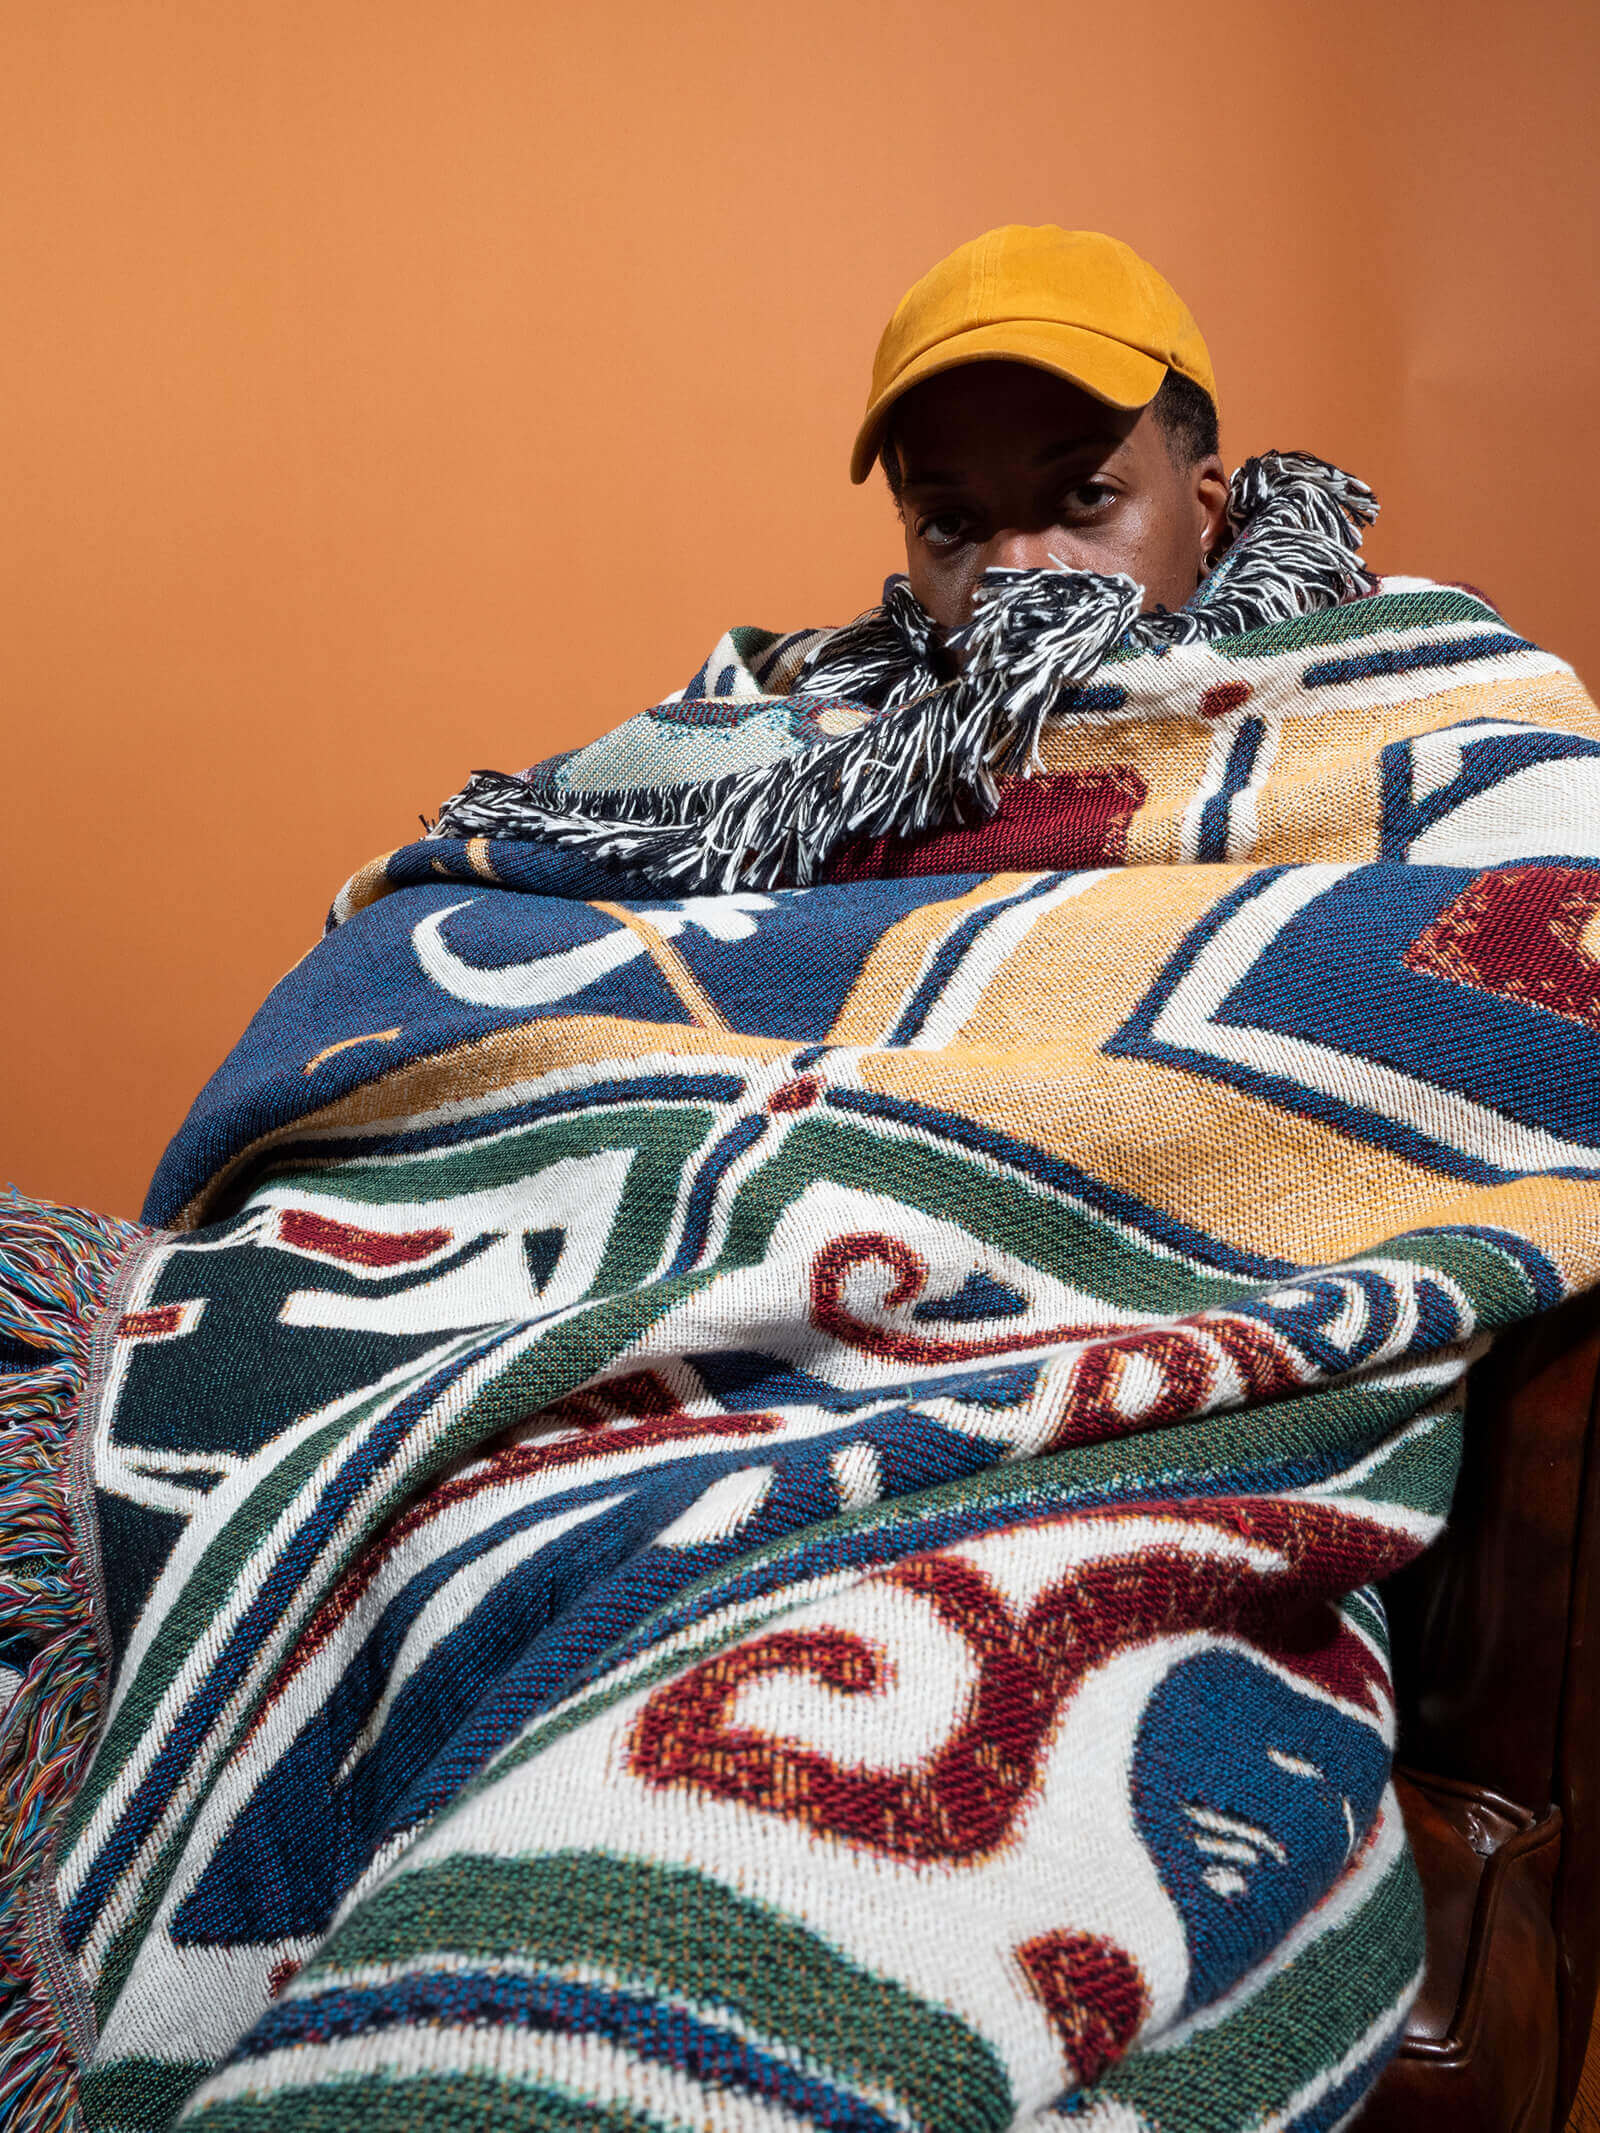 Phillip in a chair wearing heritage blanket